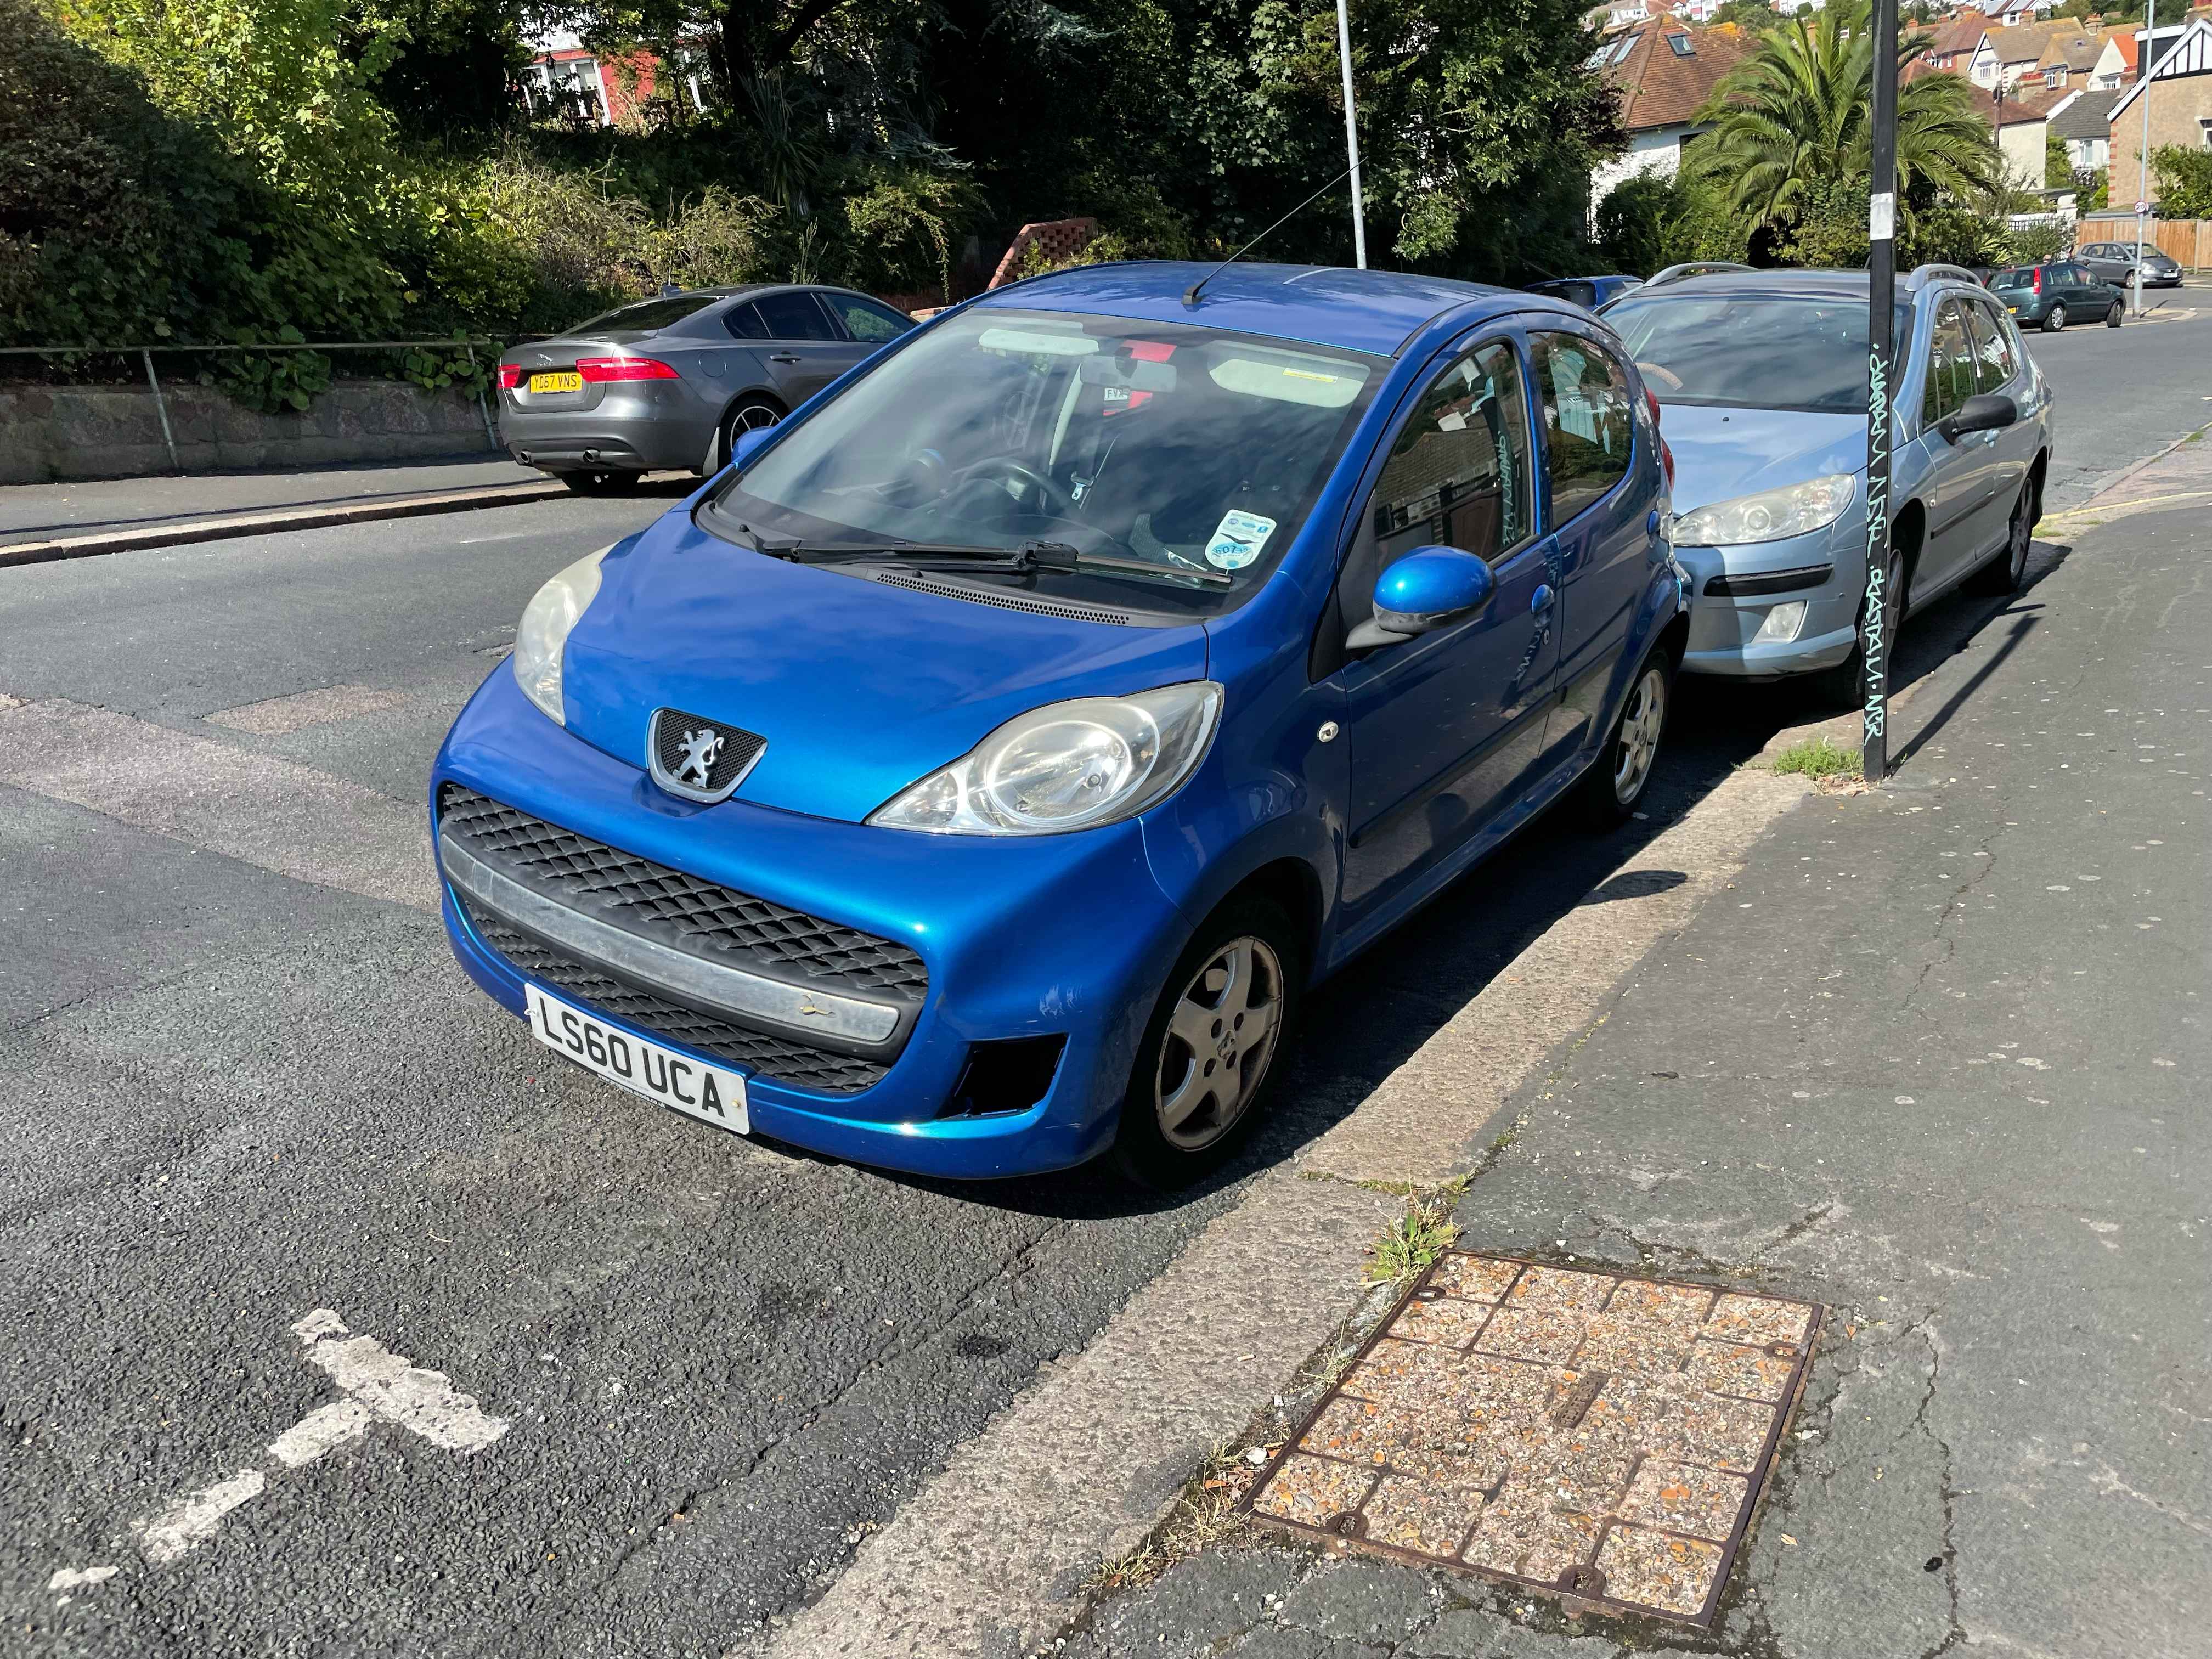 Photograph of LS60 UCA - a Blue Peugeot 107 parked in Hollingdean by a non-resident. The first of seven photographs supplied by the residents of Hollingdean.